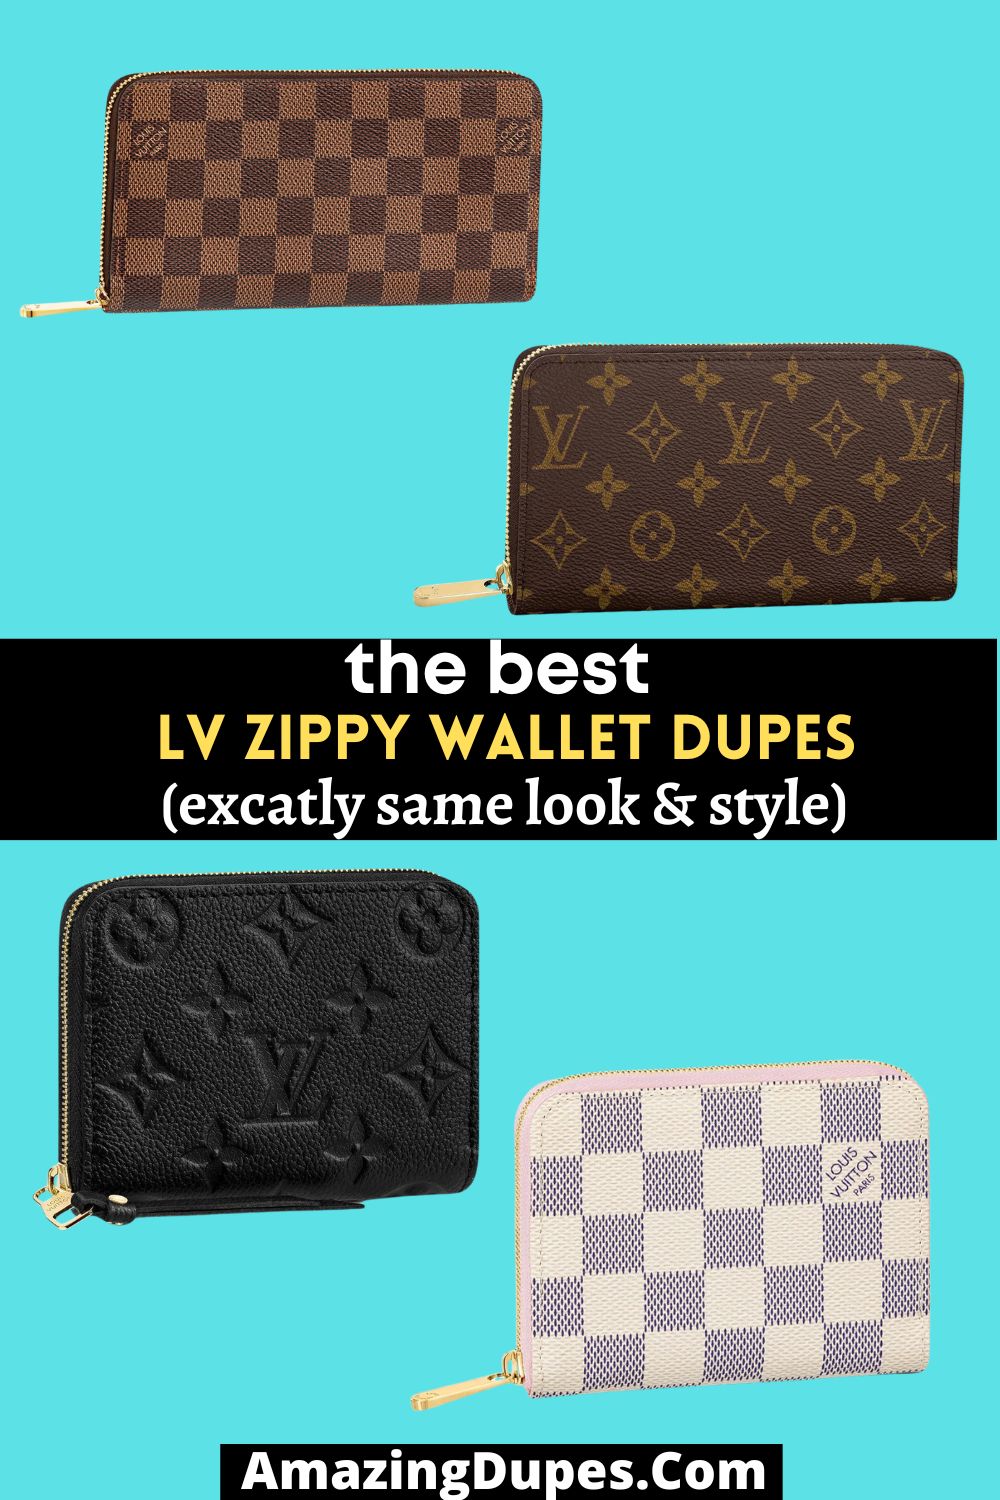 Best Lv Wallet Replica On Dhgate Designer Louis Vuitton Wallets Dupe On Amazon And Dhgate